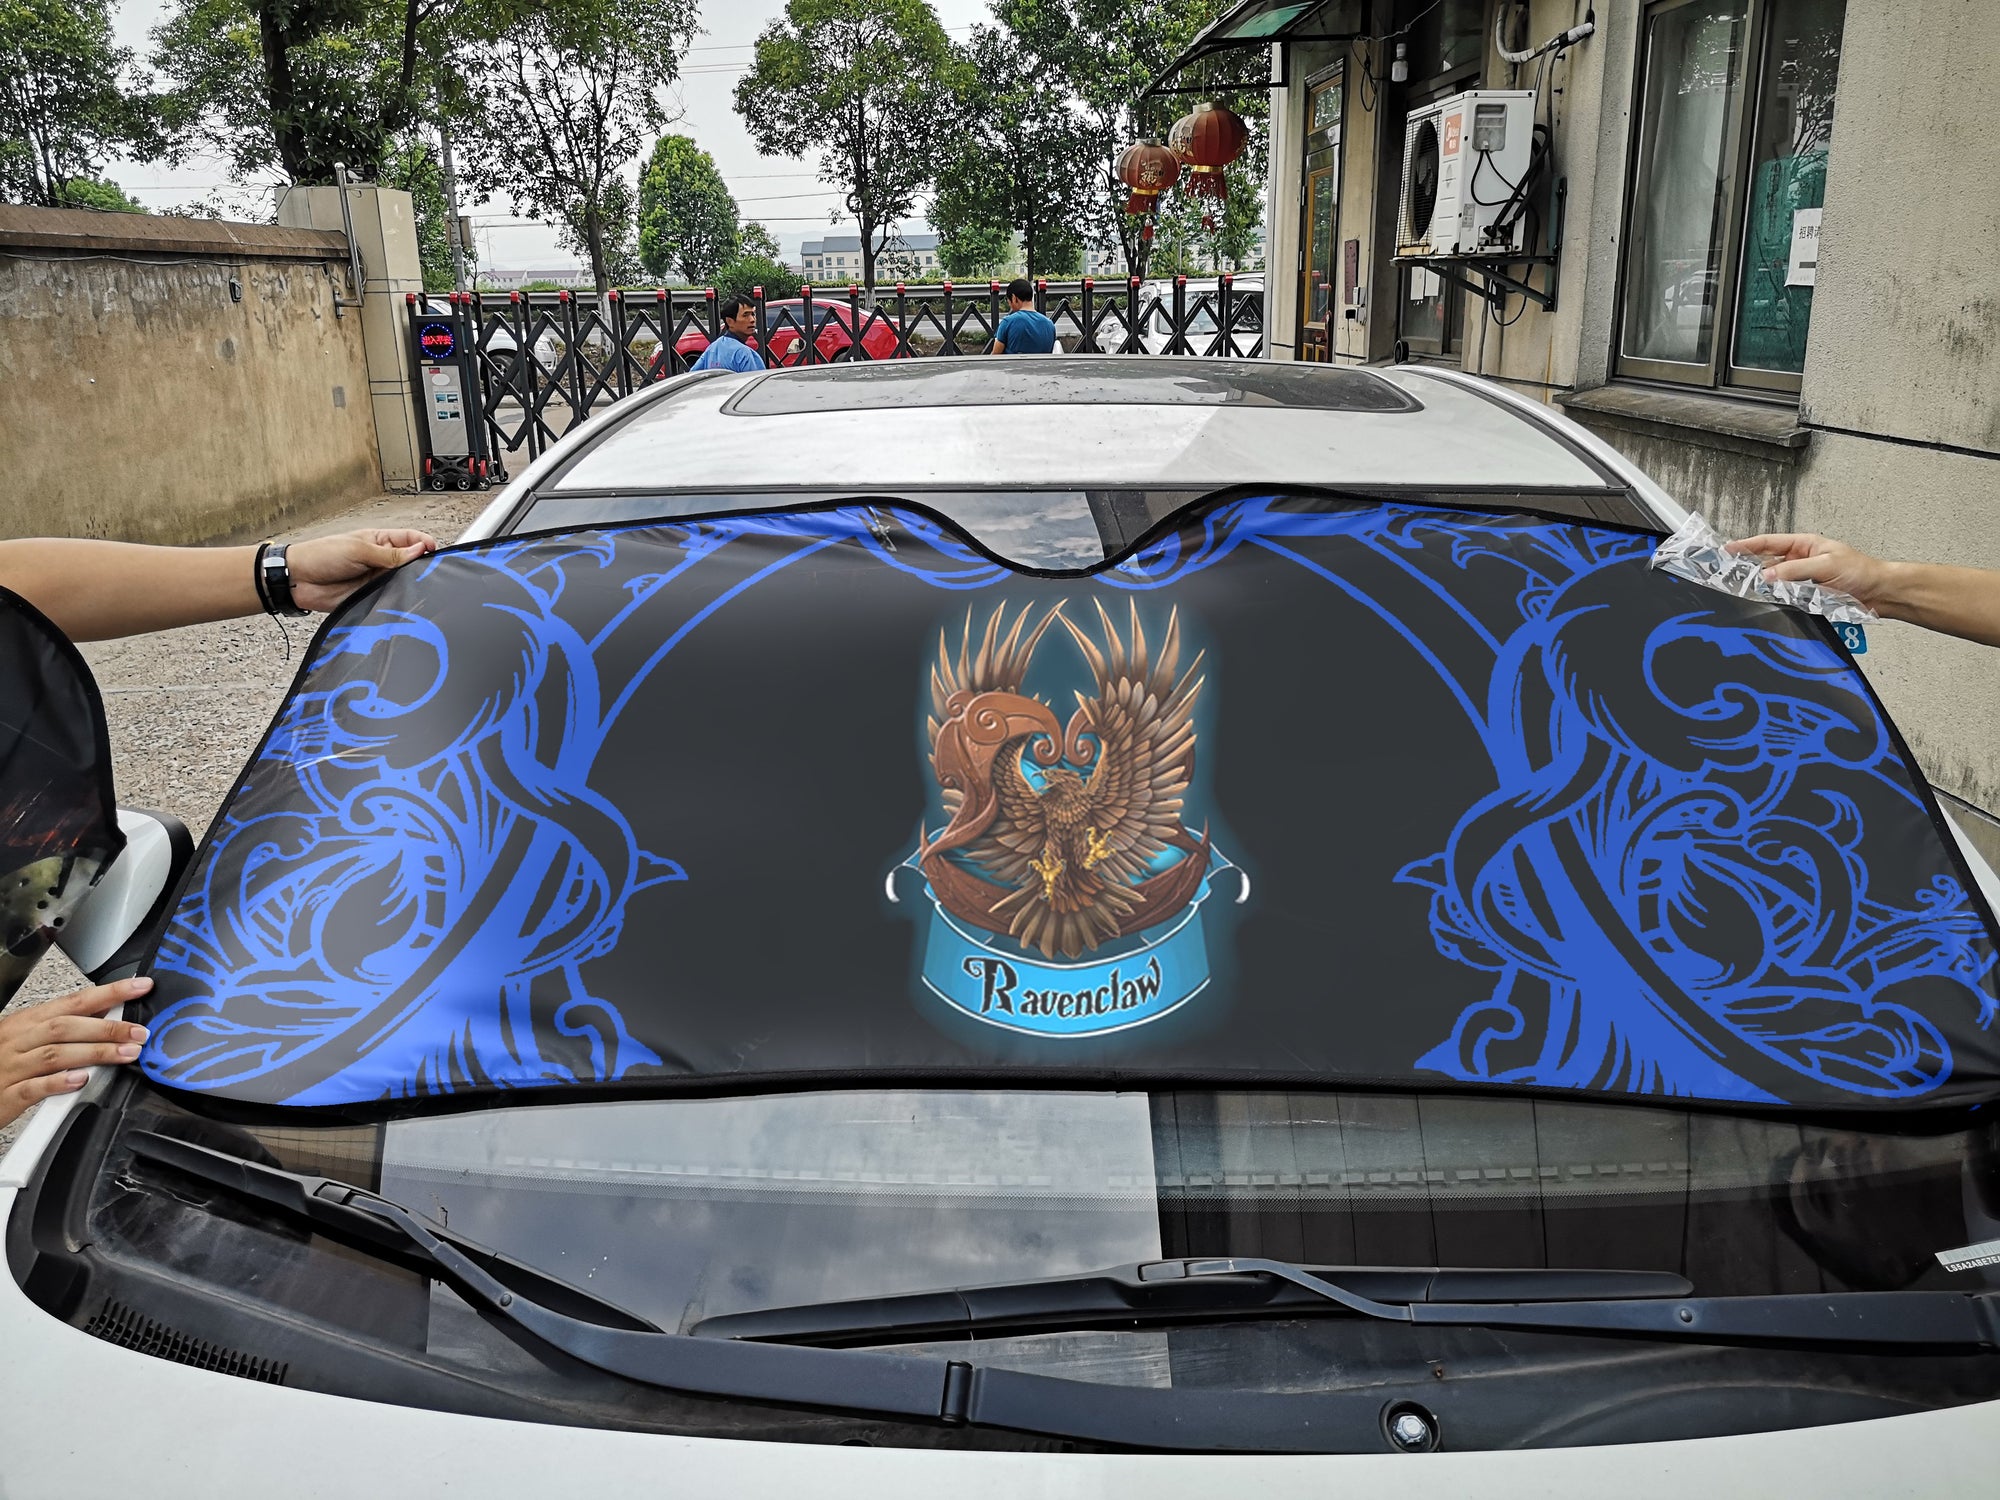 Wise Like A Ravenclaw Harry Potter Auto Sun Shade 57 x 27.5 Inches (145 x 70 cm)  